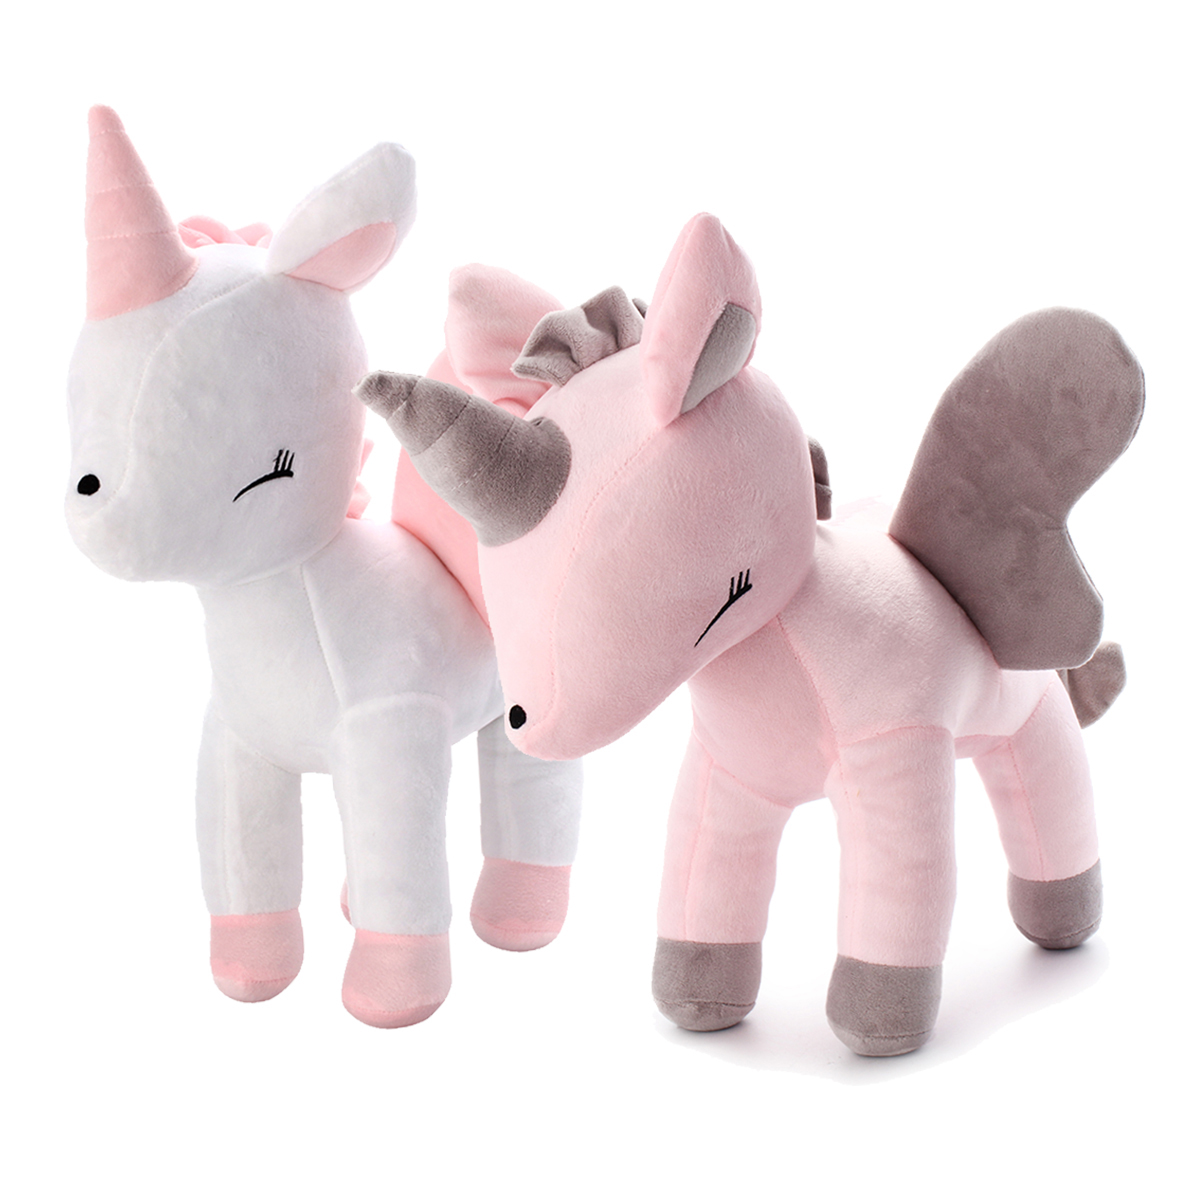 16-Inches-Soft-Giant-Unicorn-Stuffed-Plush-Toy-Animal-Doll-Children-Gifts-Photo-Props-Gift-1299365-1